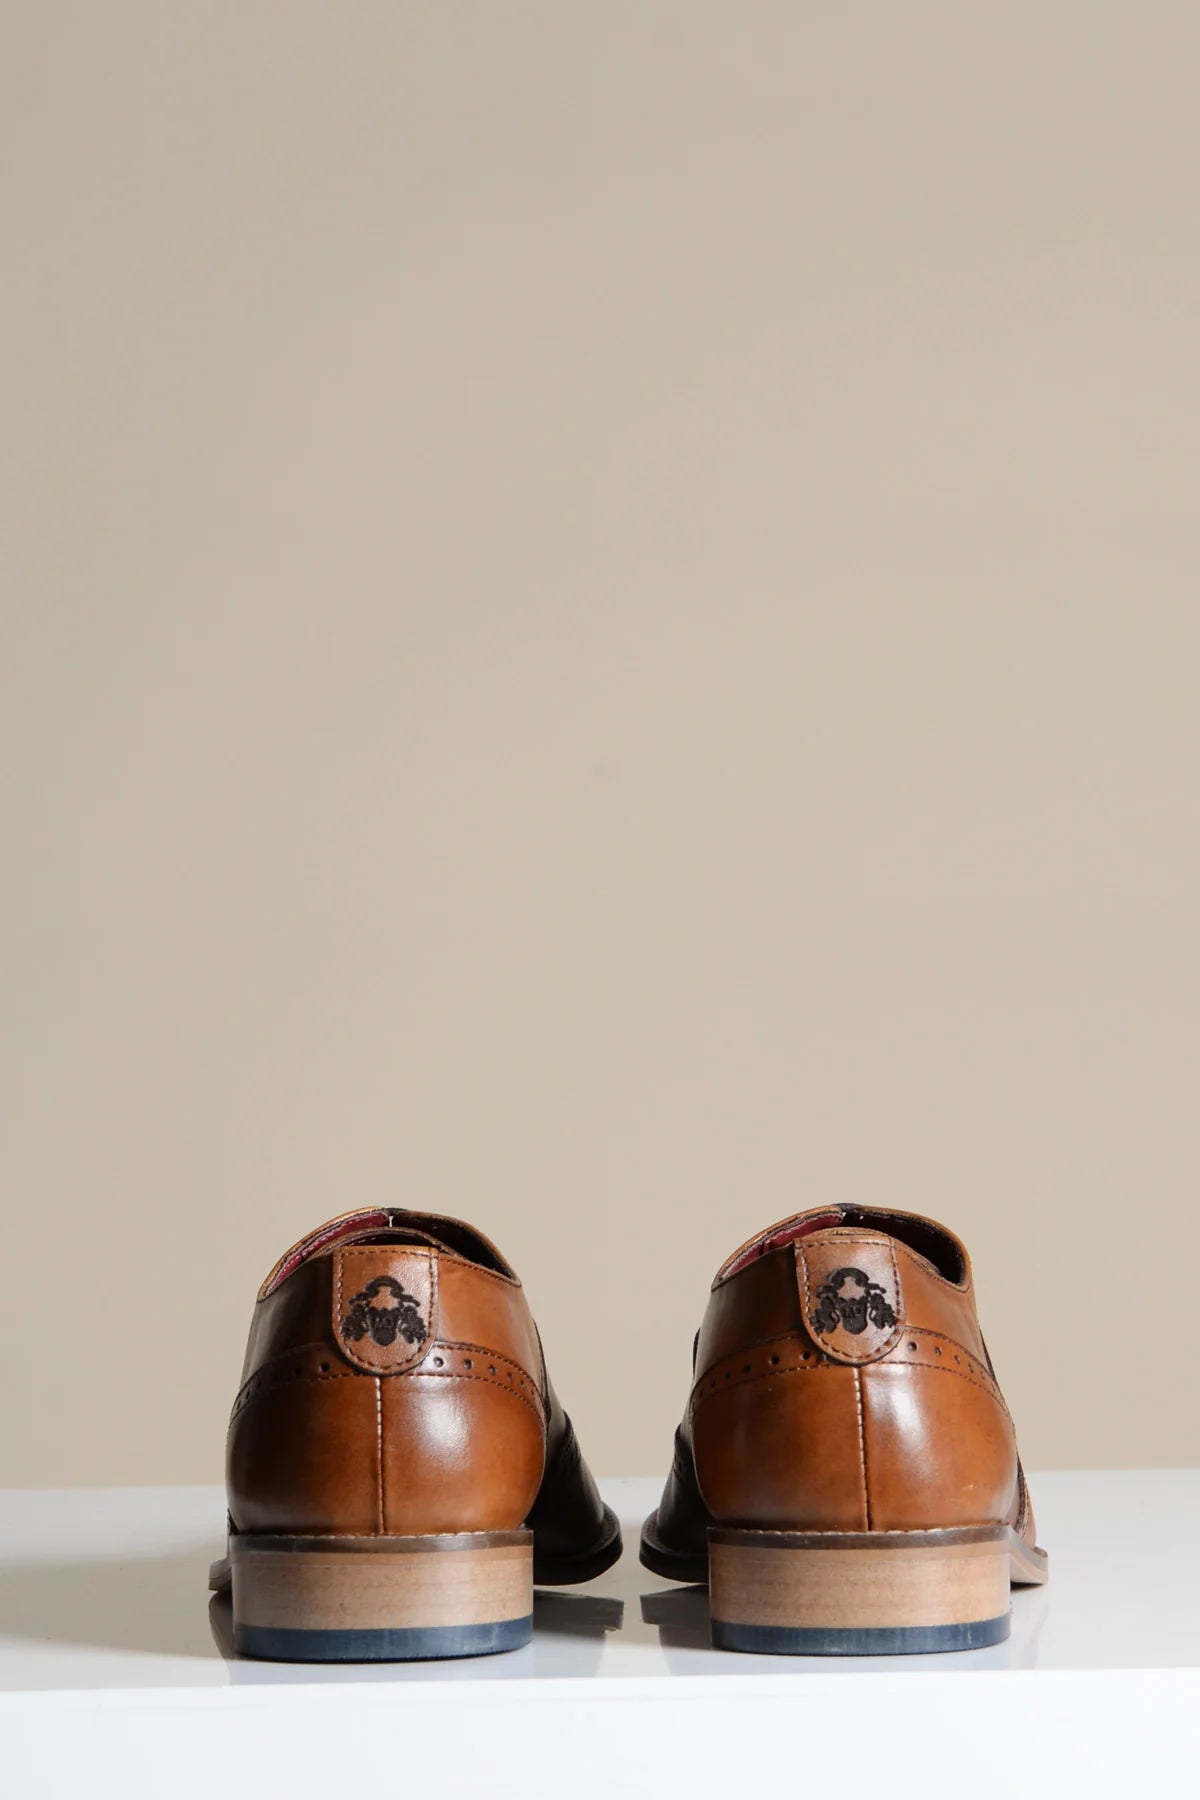 Brown leather shoes, Marc Darcy Dawson - Wingtip brogue